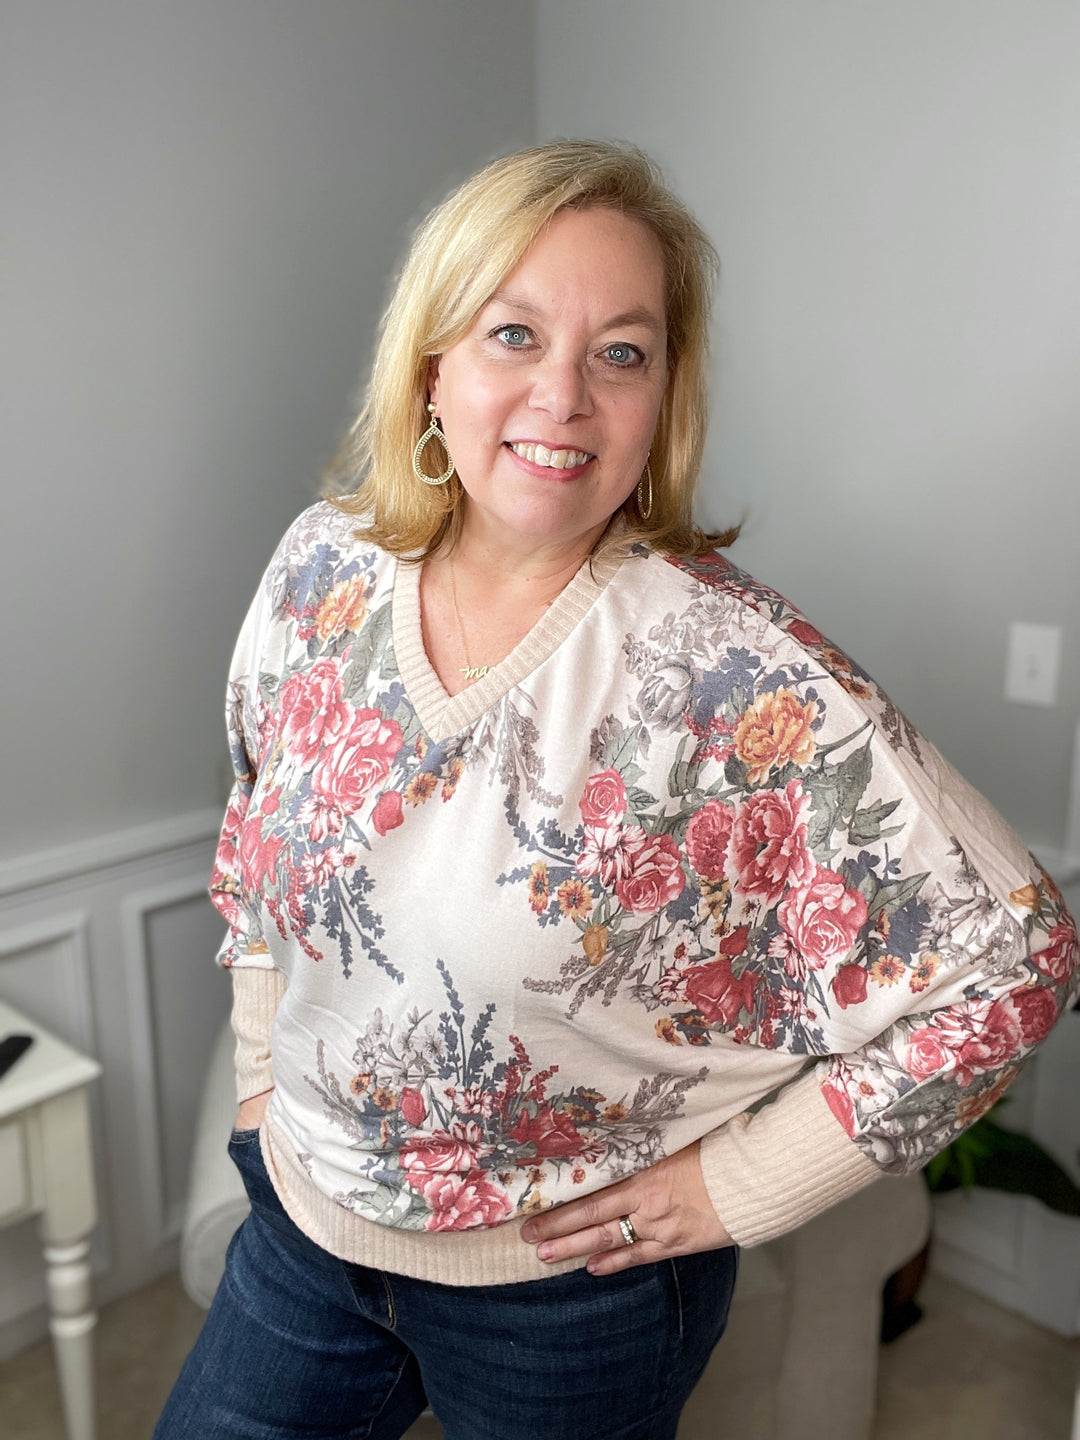 Cream Floral V-Neck Sweater with Dolman Sleeves-sweater-White Birch-Styled by Steph-Women's Fashion Clothing Boutique, Indiana